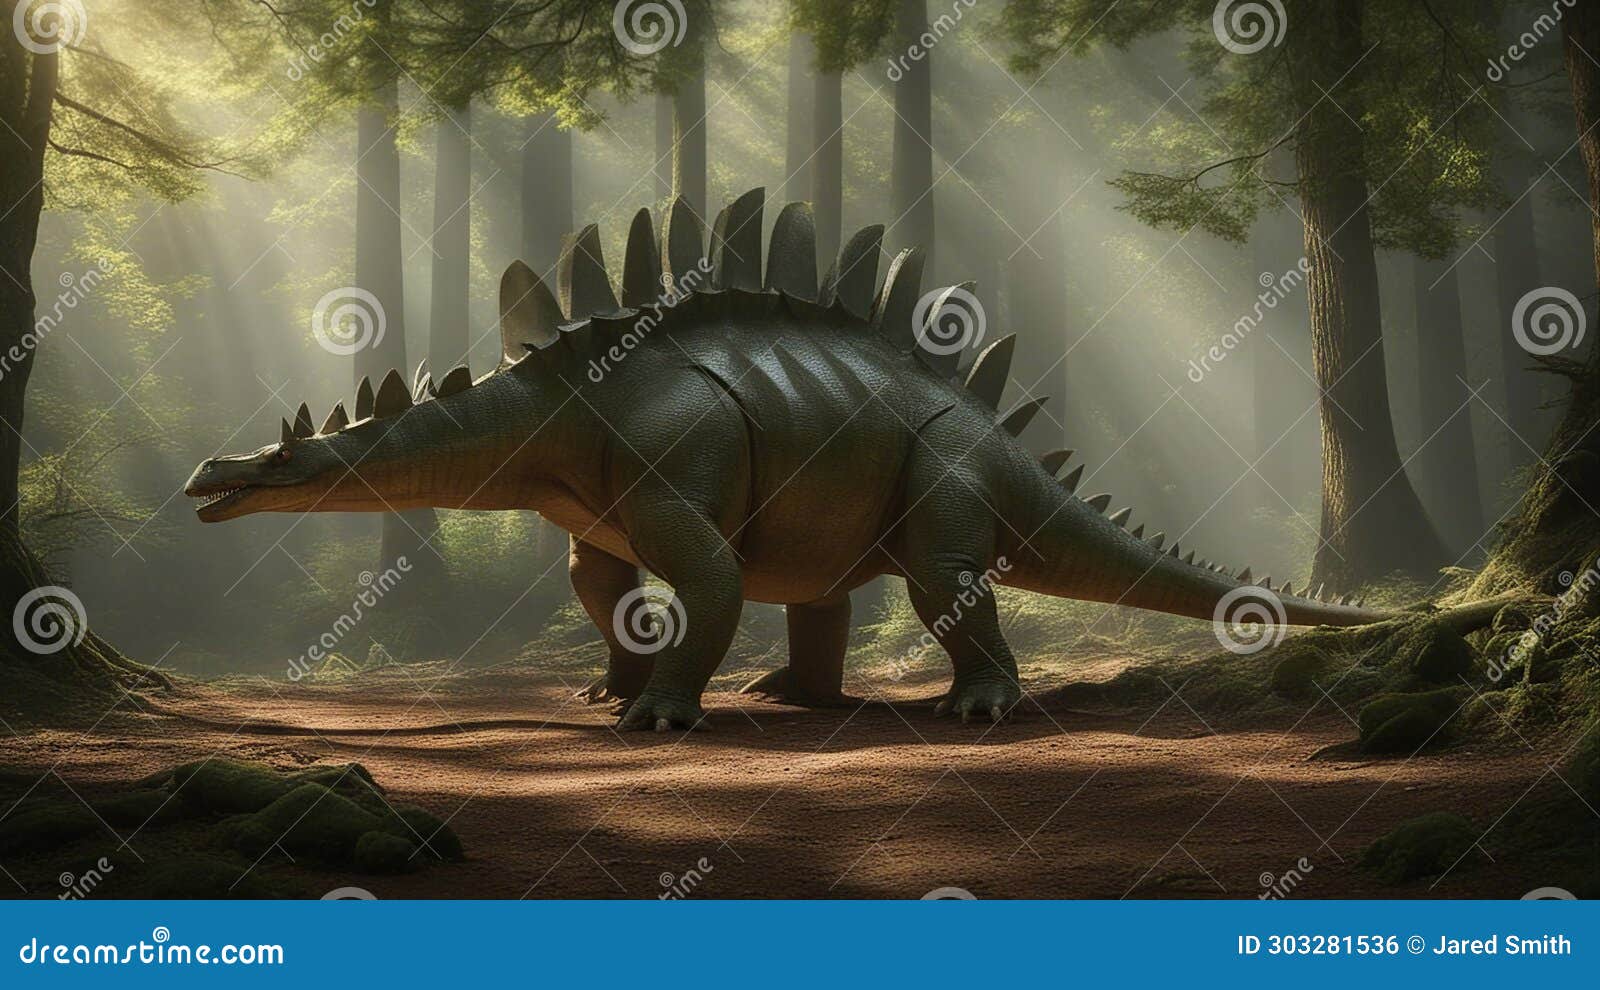 a descriptive scene with a stegosaurus walking through a forest. the stegosaurus is green and scaly